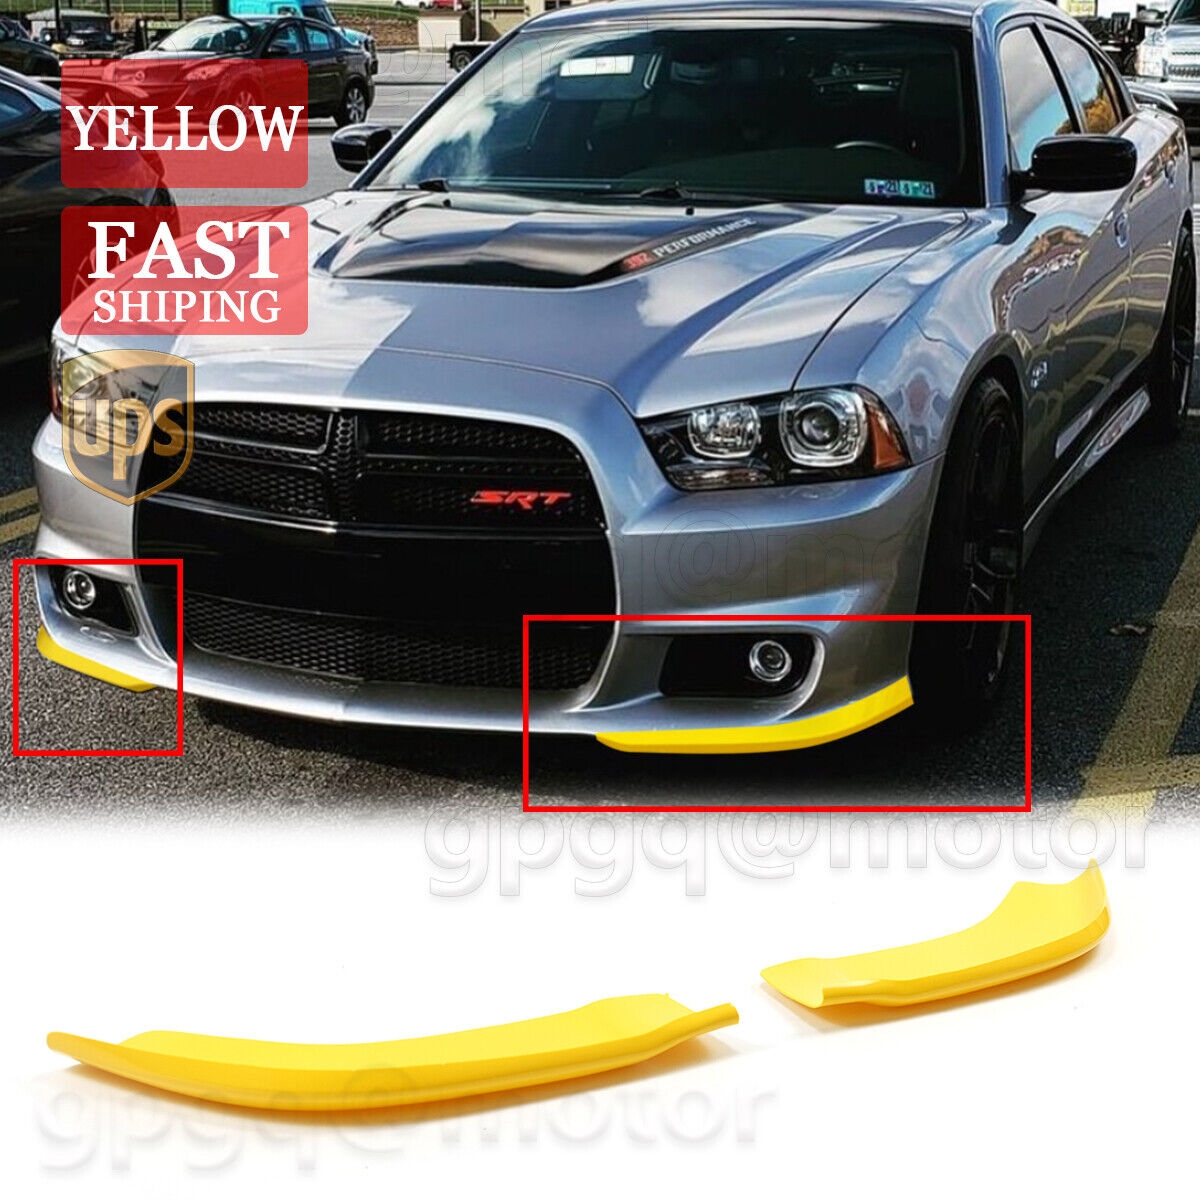 For Dodge Charger SRT8 2011-14 Yellow Front Bumper Lip Splitter Guard Protector